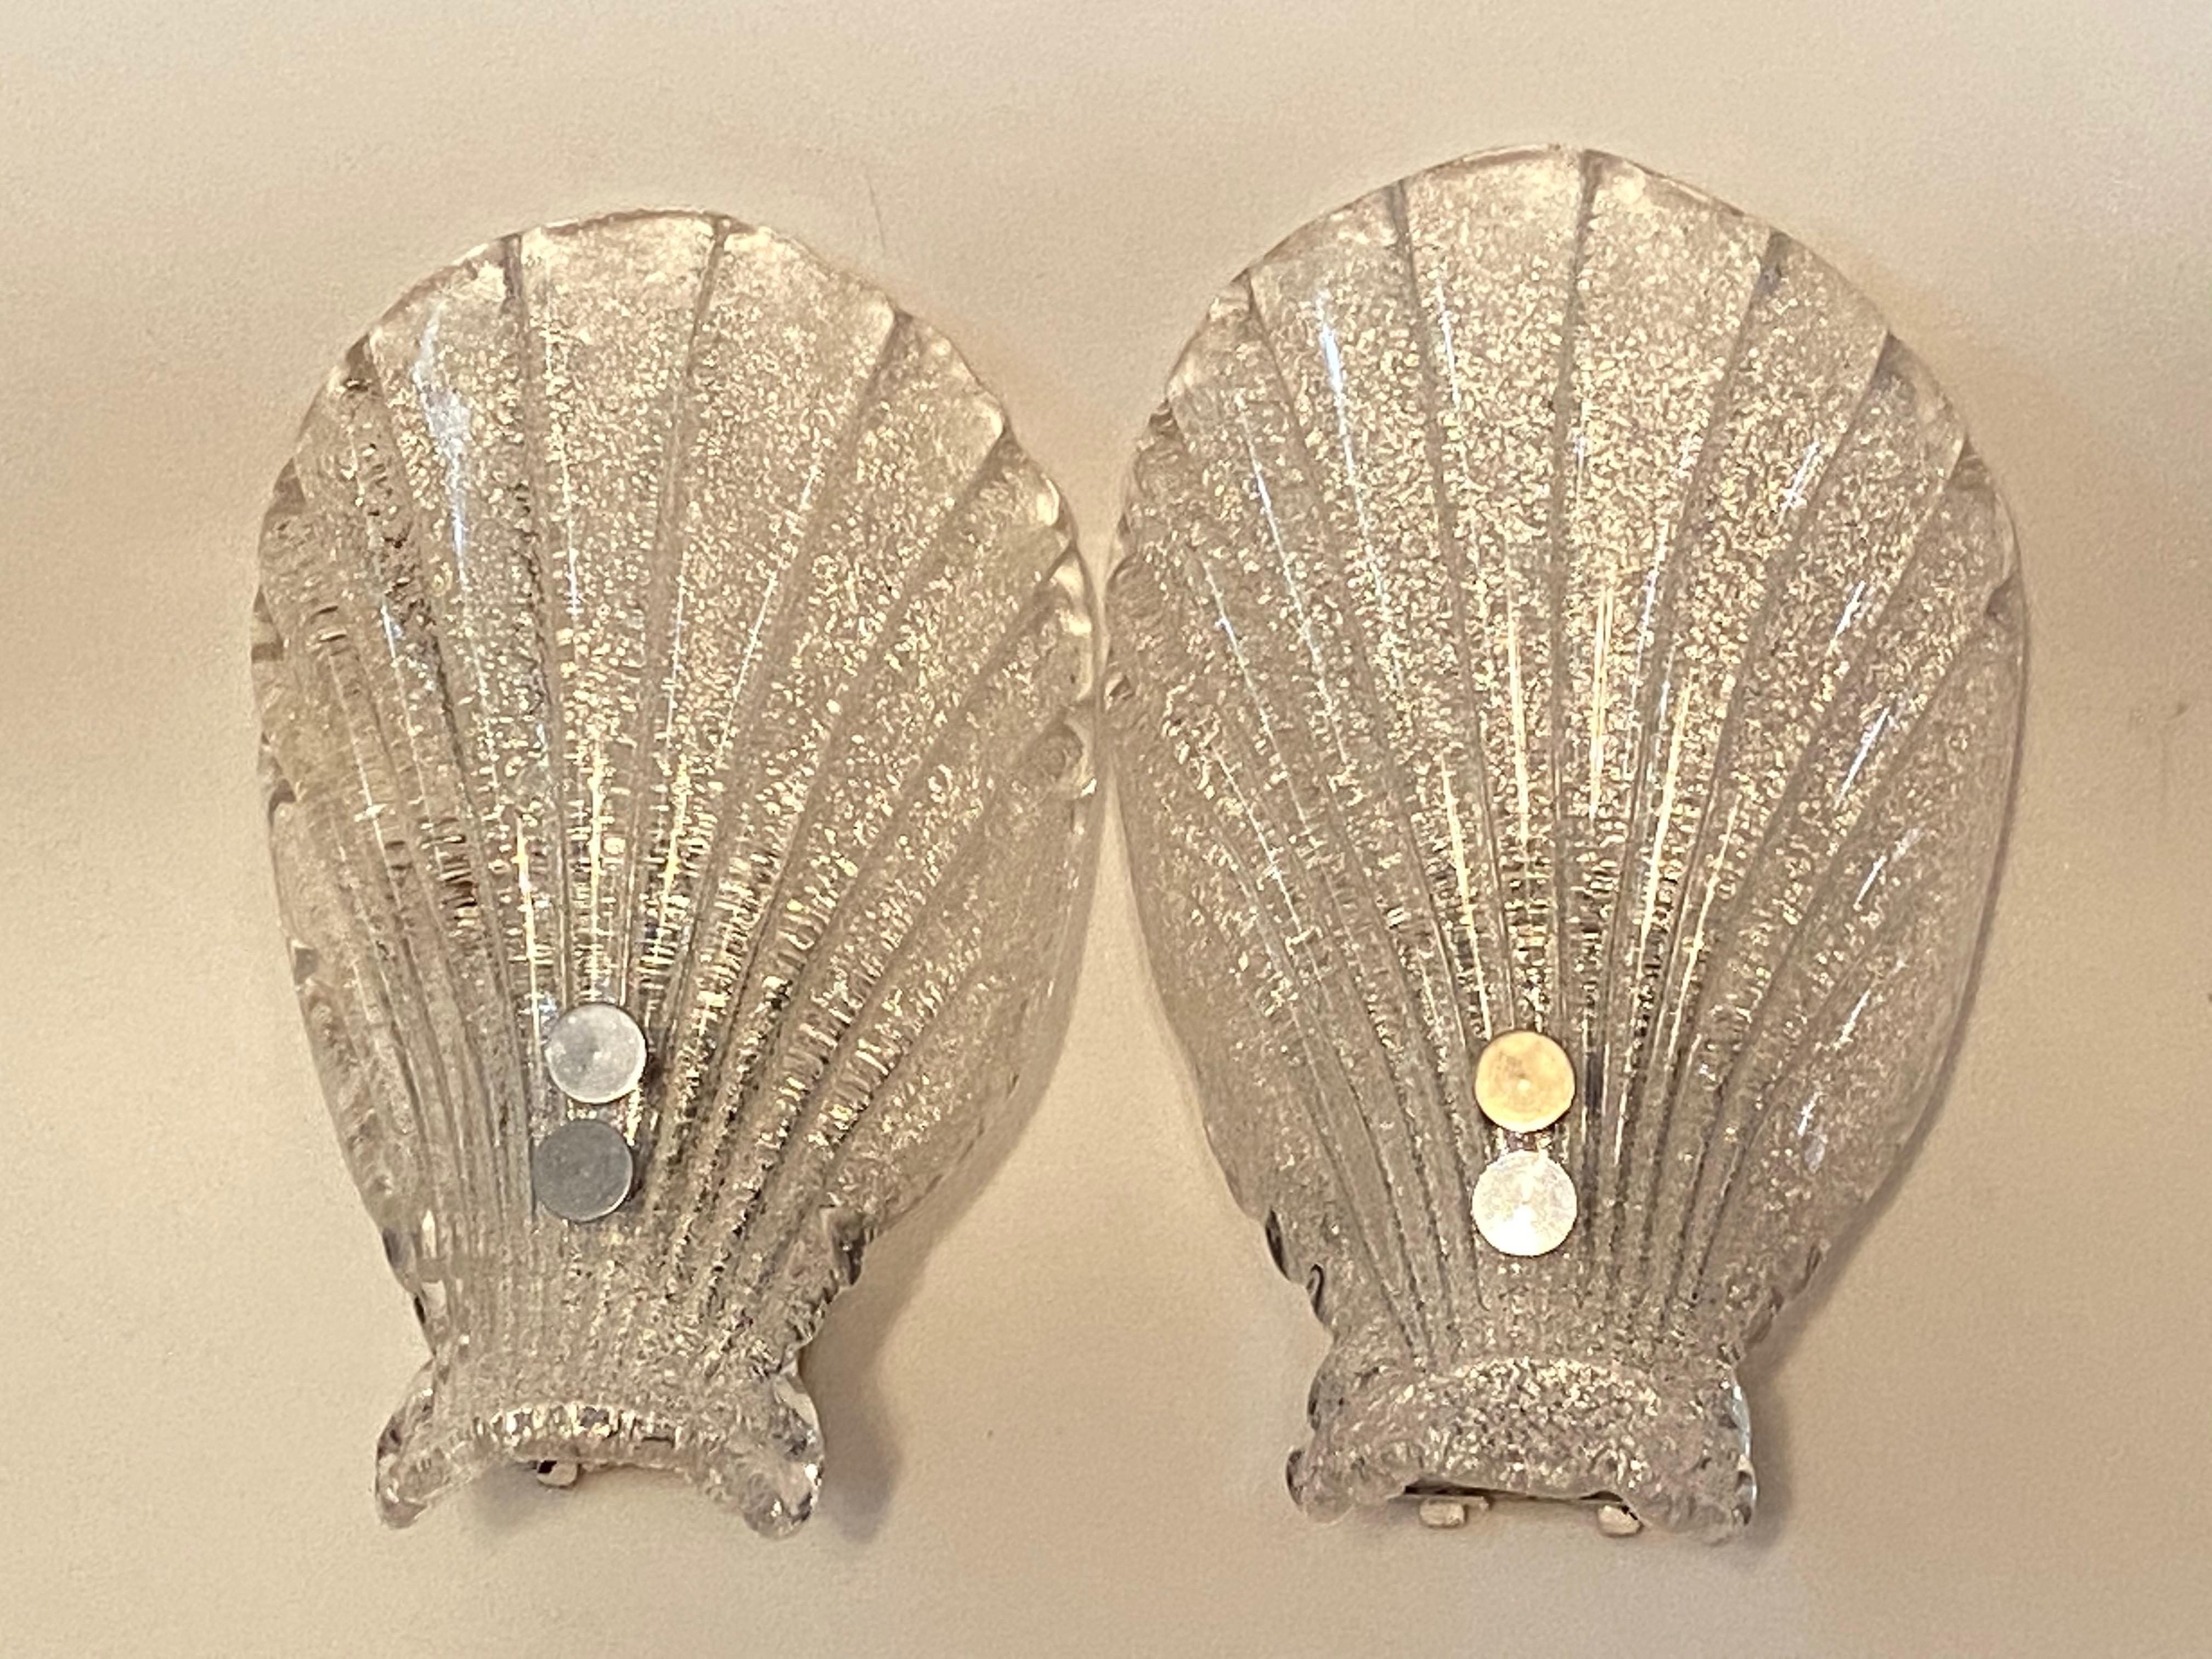 Pair of sea shell form wall lights, produced in Germany by Soelken Leuchten, in textured glass, affixed against a chrome base, circa 1960s. The glass shades probably made in Murano Italy and chrome base made in Germany. An iconic design from the